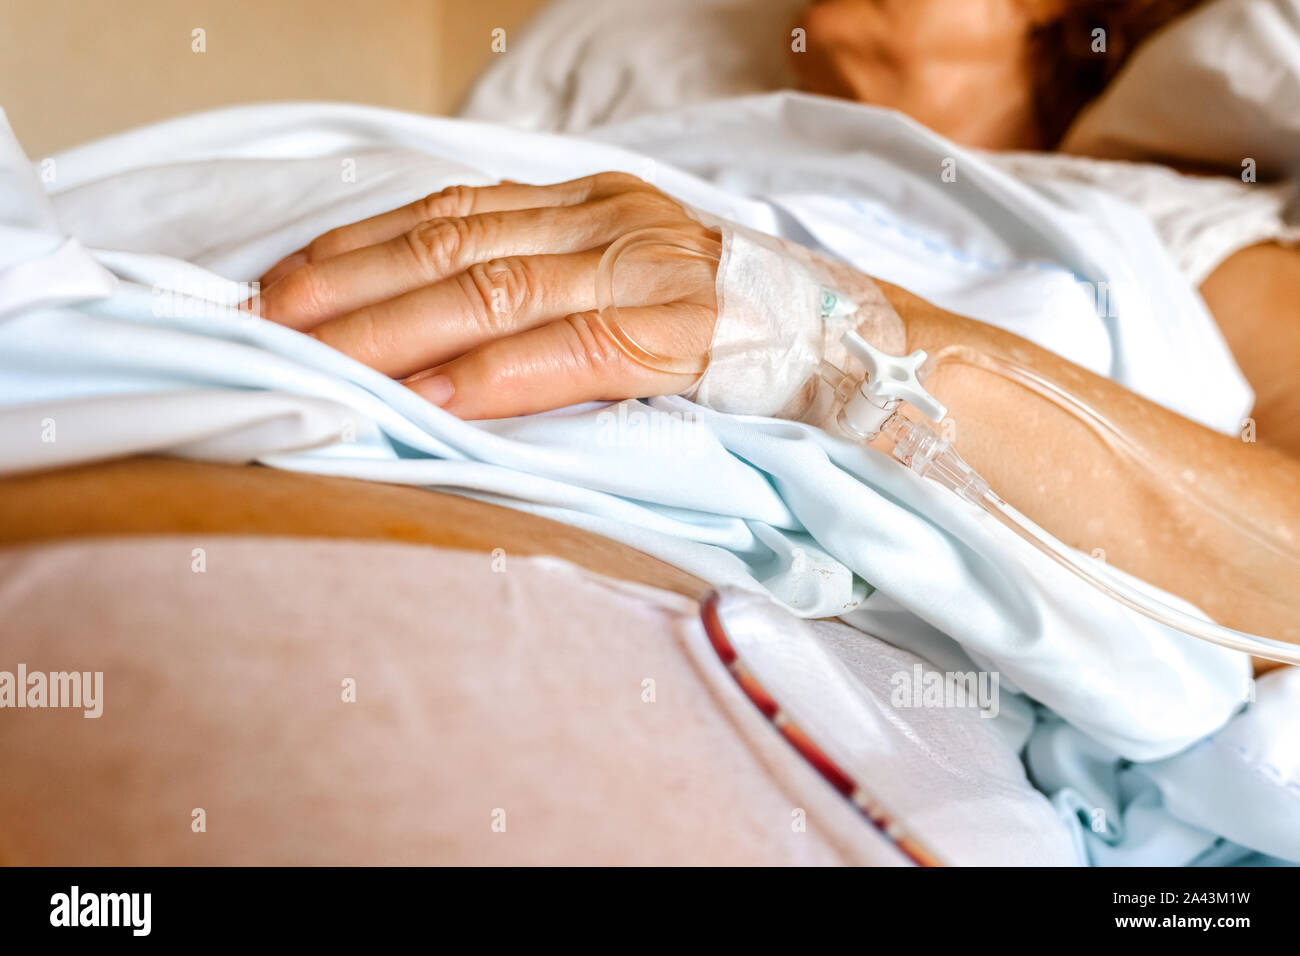 Intravenous cannula placed in the hand of an elderly patient for palliative care of a terminal patient. Stock Photo